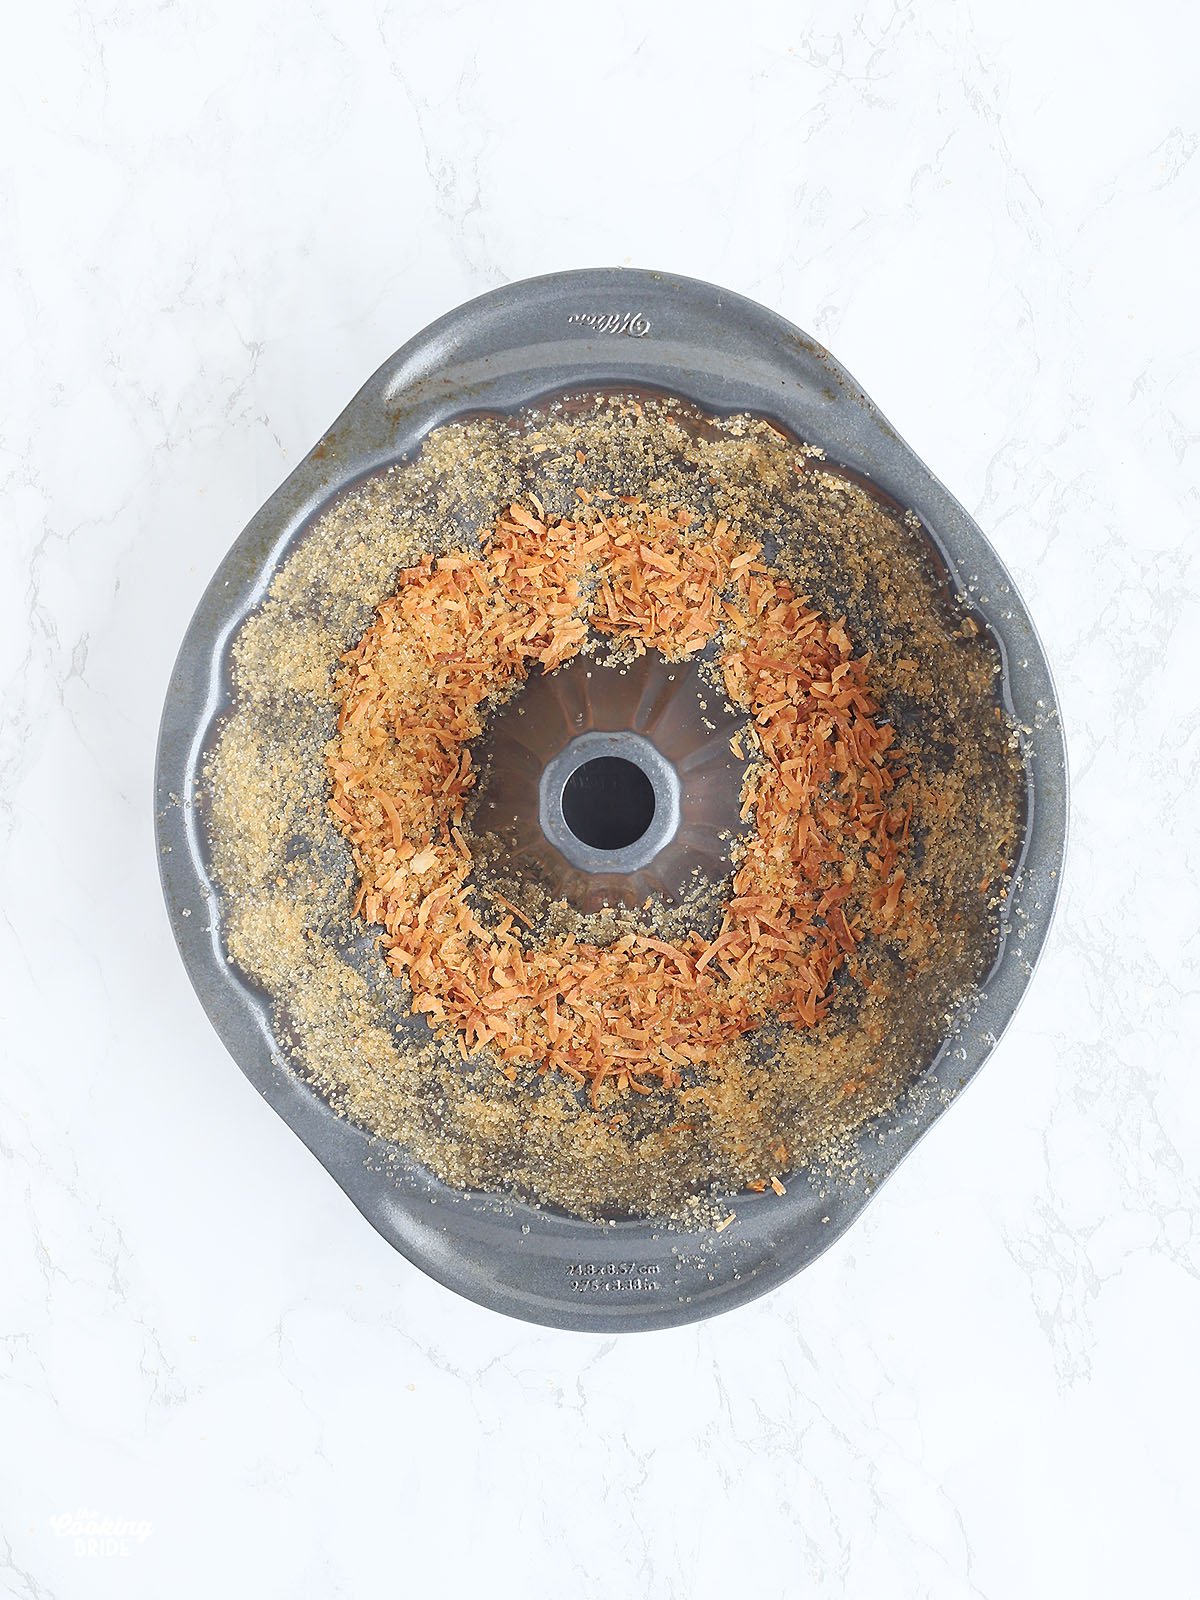 greased Bundt cake pan sprinkled with raw sugar and toasted coconut